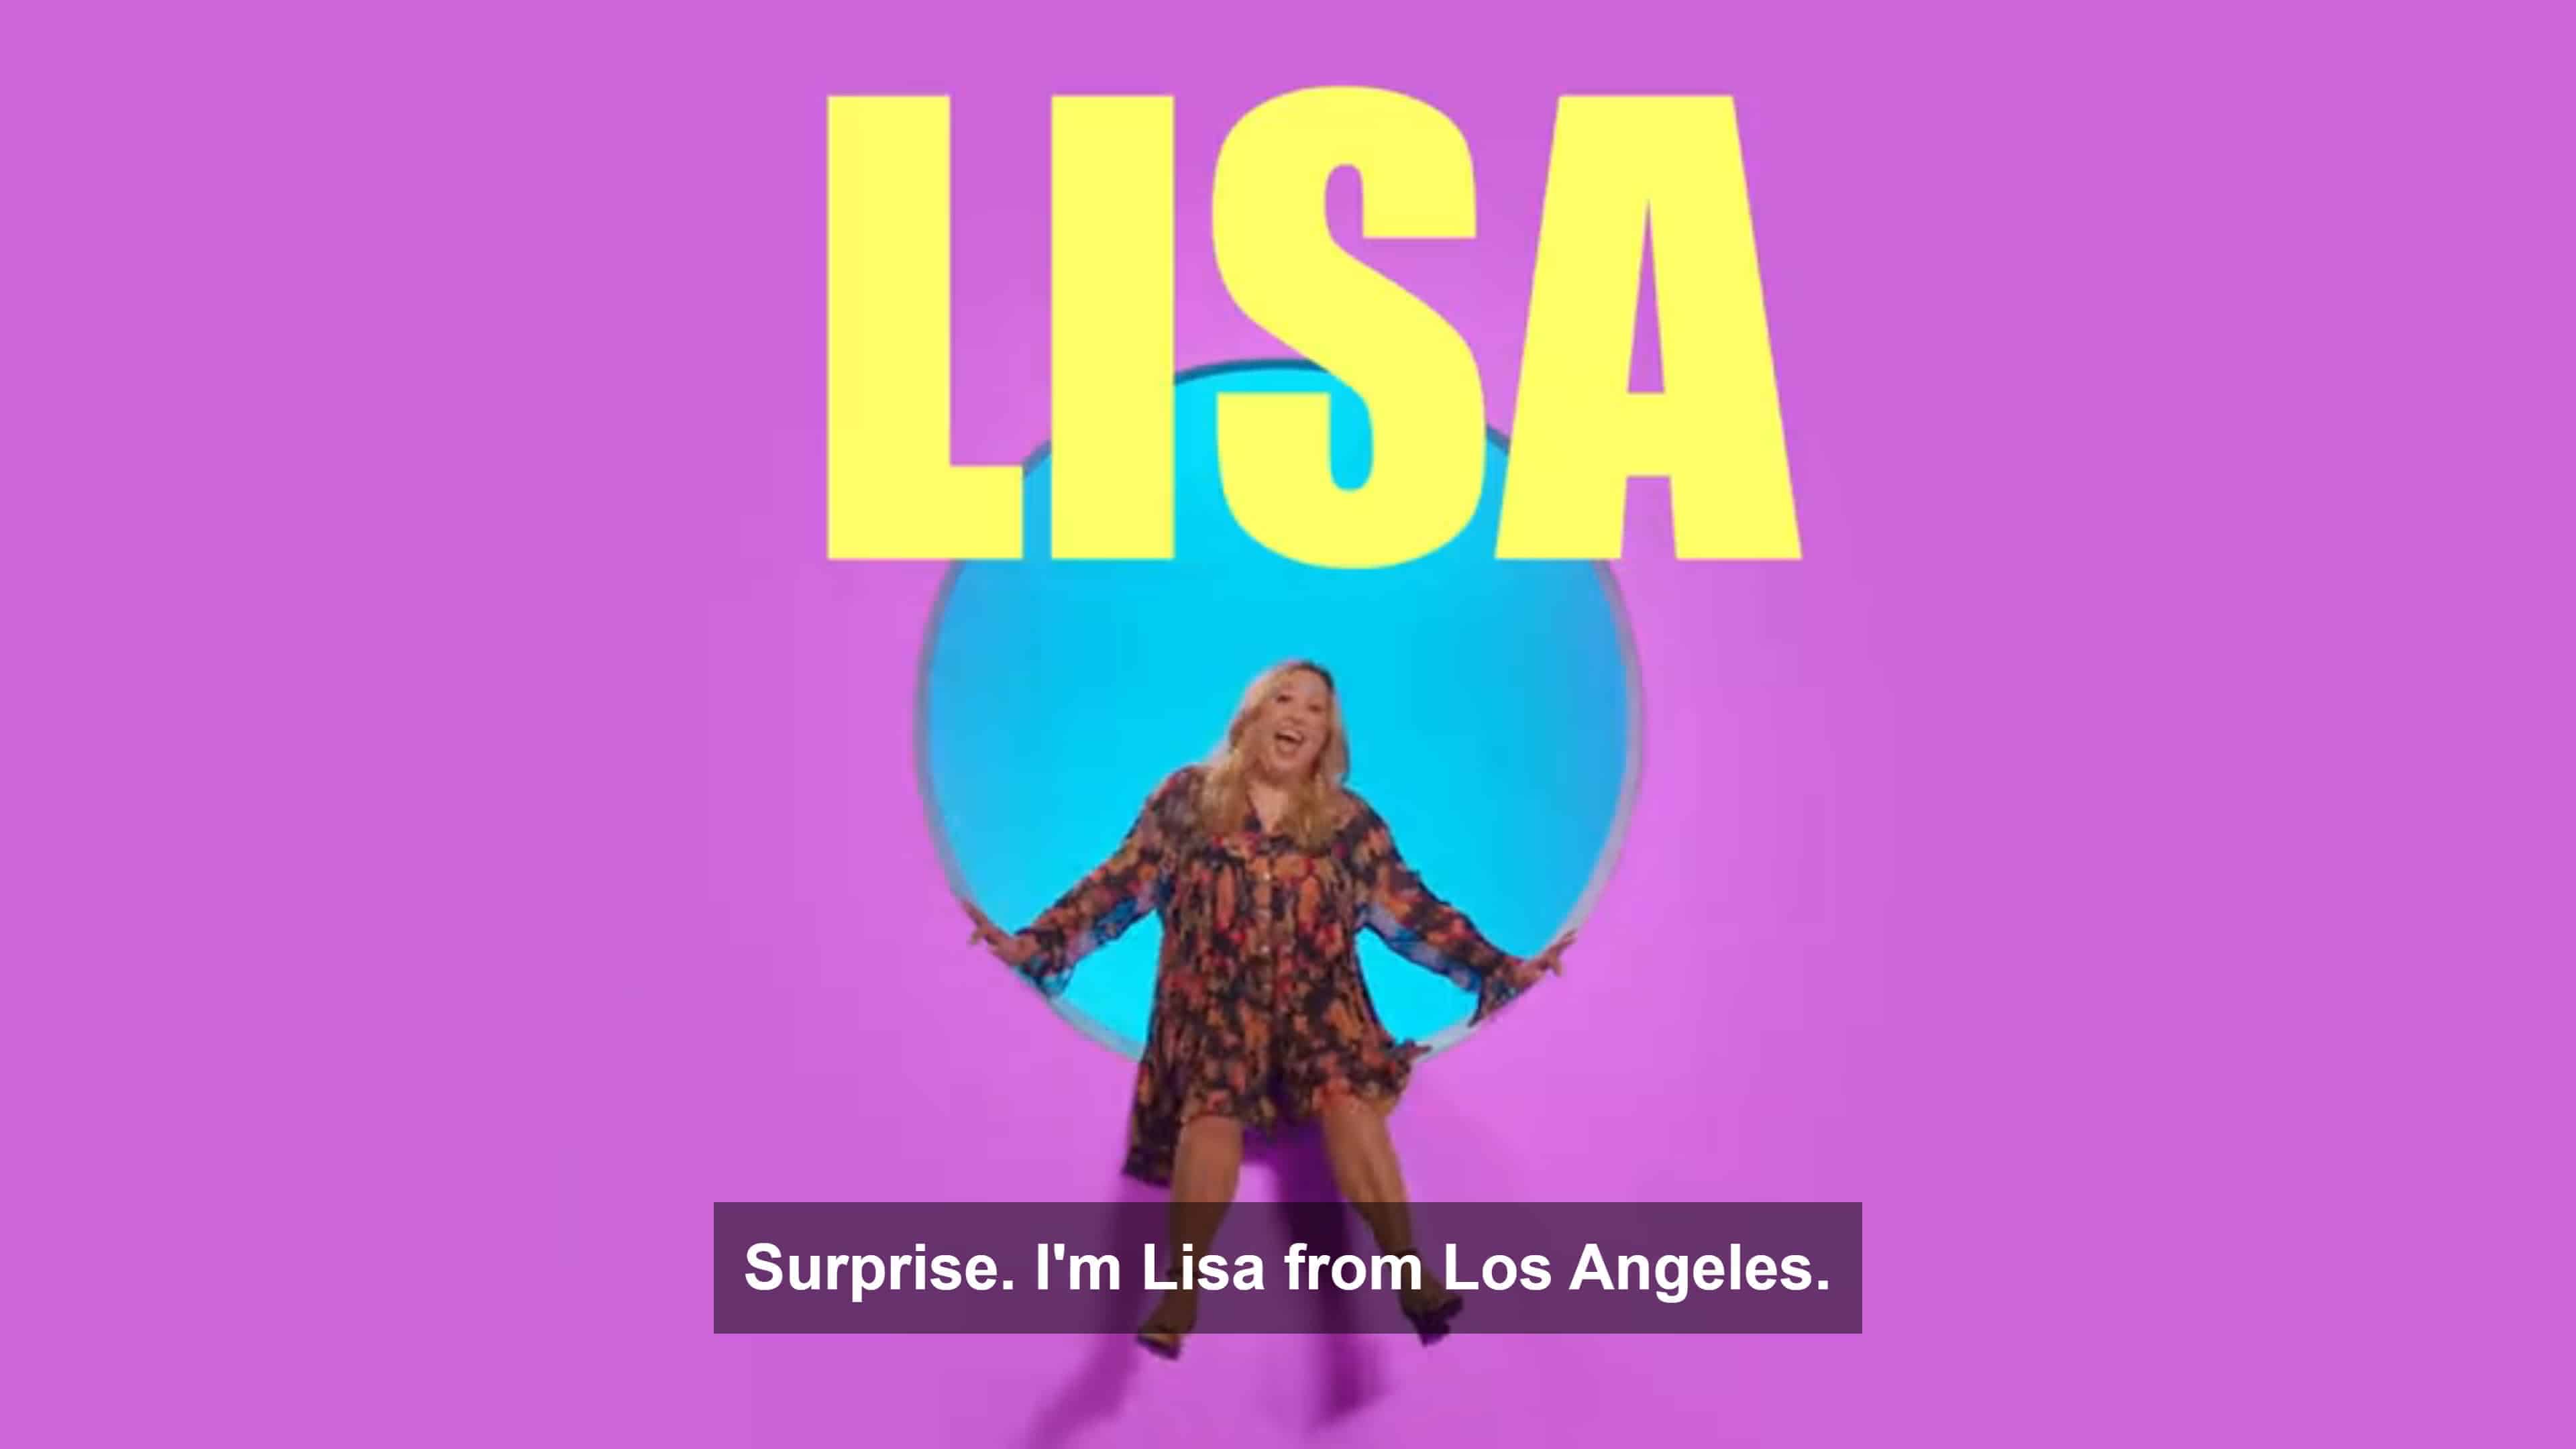 Lisa revealing she is catfishing everyone by pretending to be Lance Bass from *Nsync